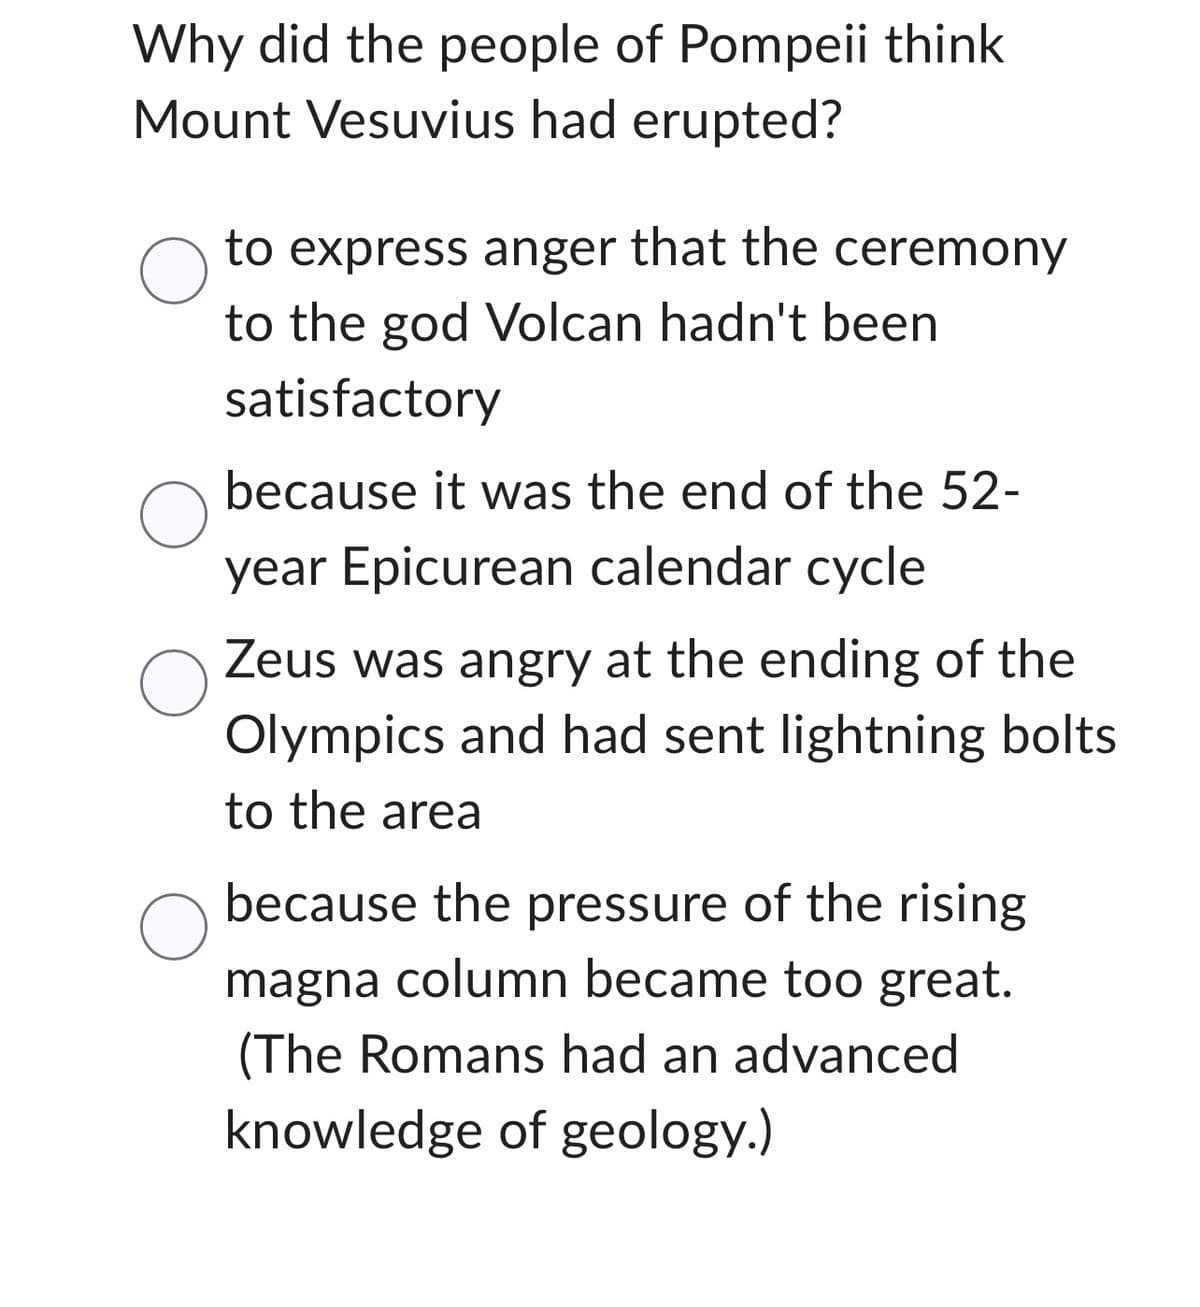 Why did the people of Pompeii think
Mount Vesuvius had erupted?
O
O
to express anger that the ceremony
to the god Volcan hadn't been
satisfactory
O
because it was the end of the 52-
year Epicurean calendar cycle
O
Zeus was angry at the ending of the
Olympics and had sent lightning bolts
to the area
because the pressure of the rising
magna column became too great.
(The Romans had an advanced
knowledge of geology.)